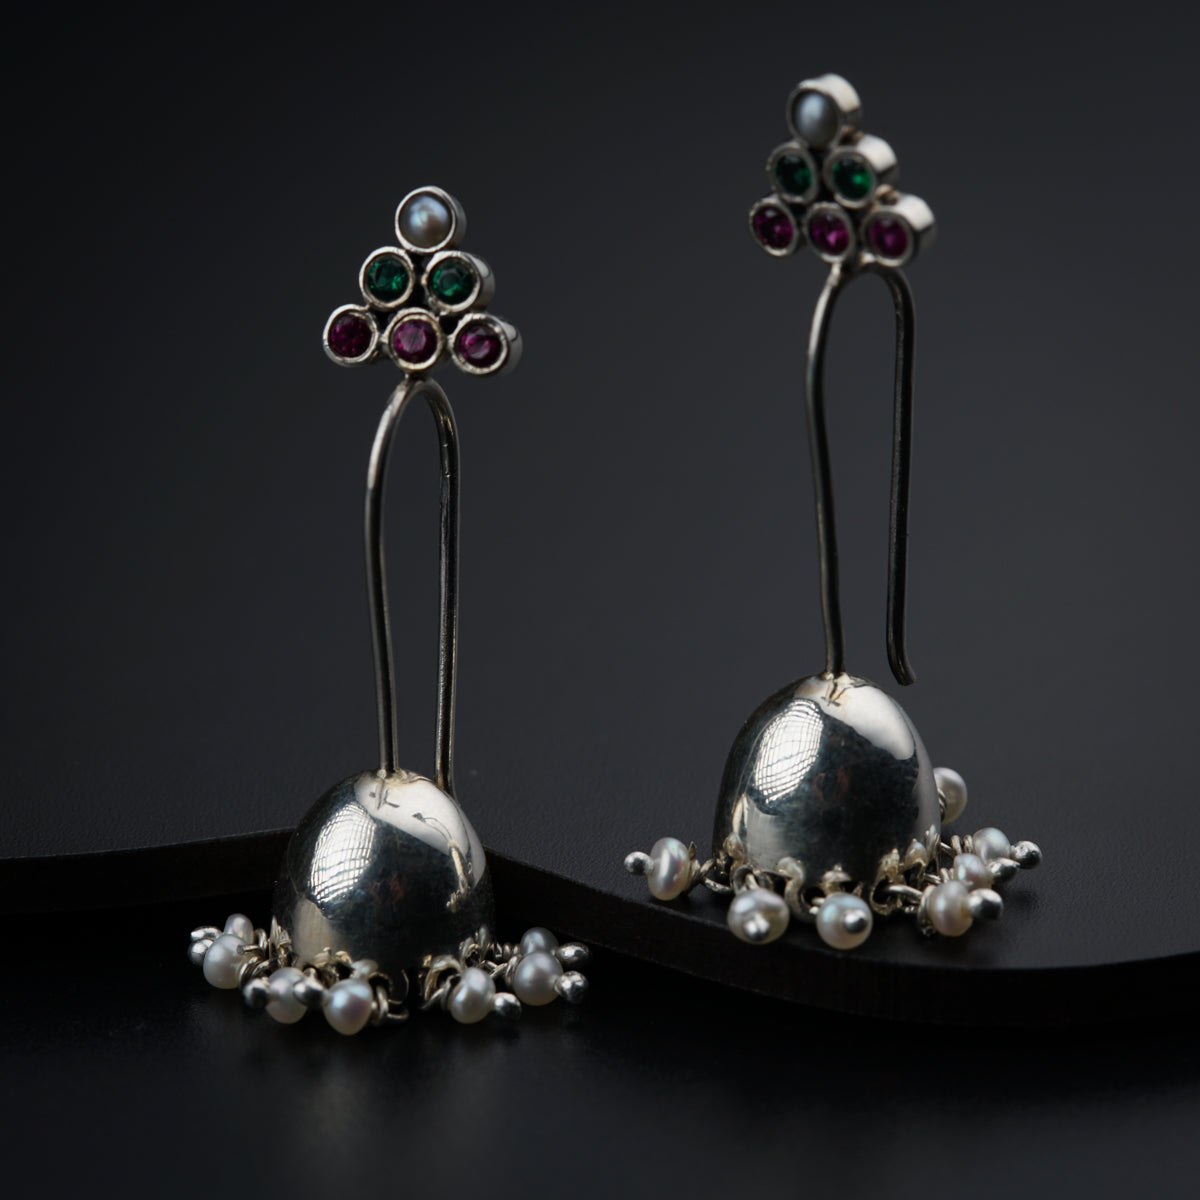 a pair of earrings with pearls and stones